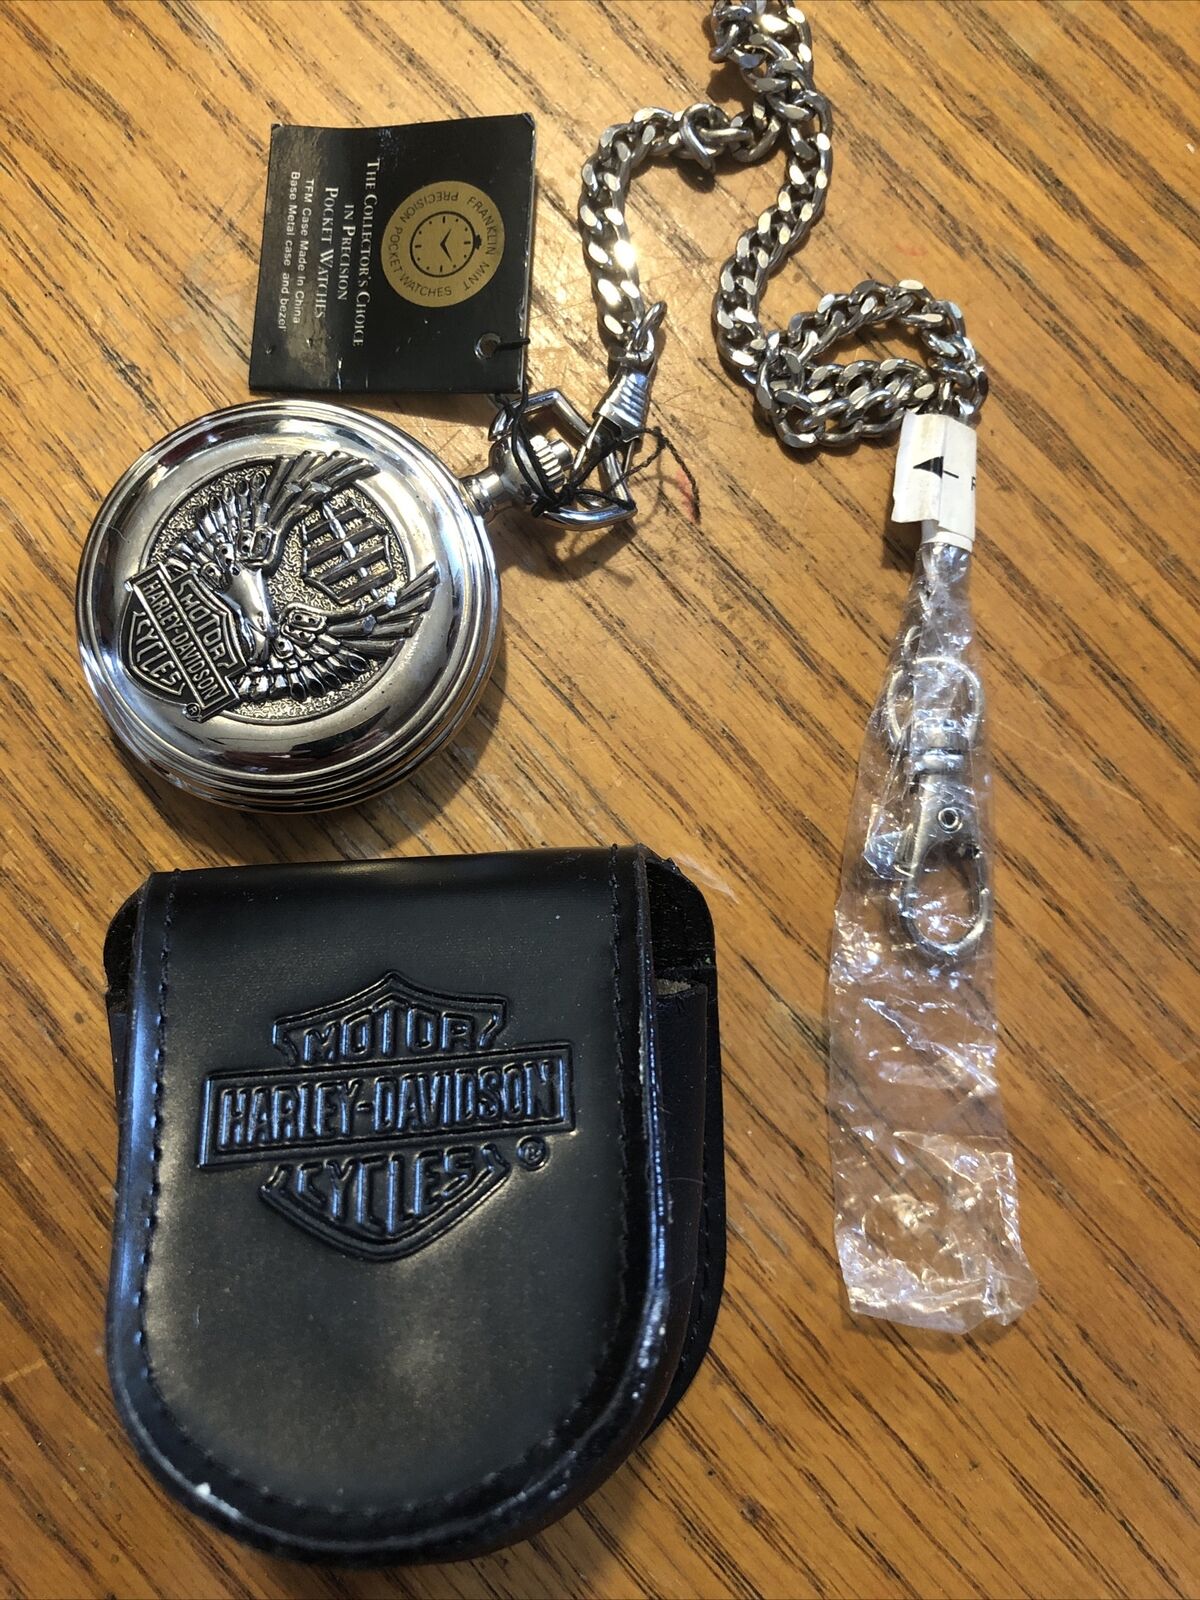 Harley Davidson Franklin Mint Pocket Watch, Chain and Case - Wings Flame Eagle 